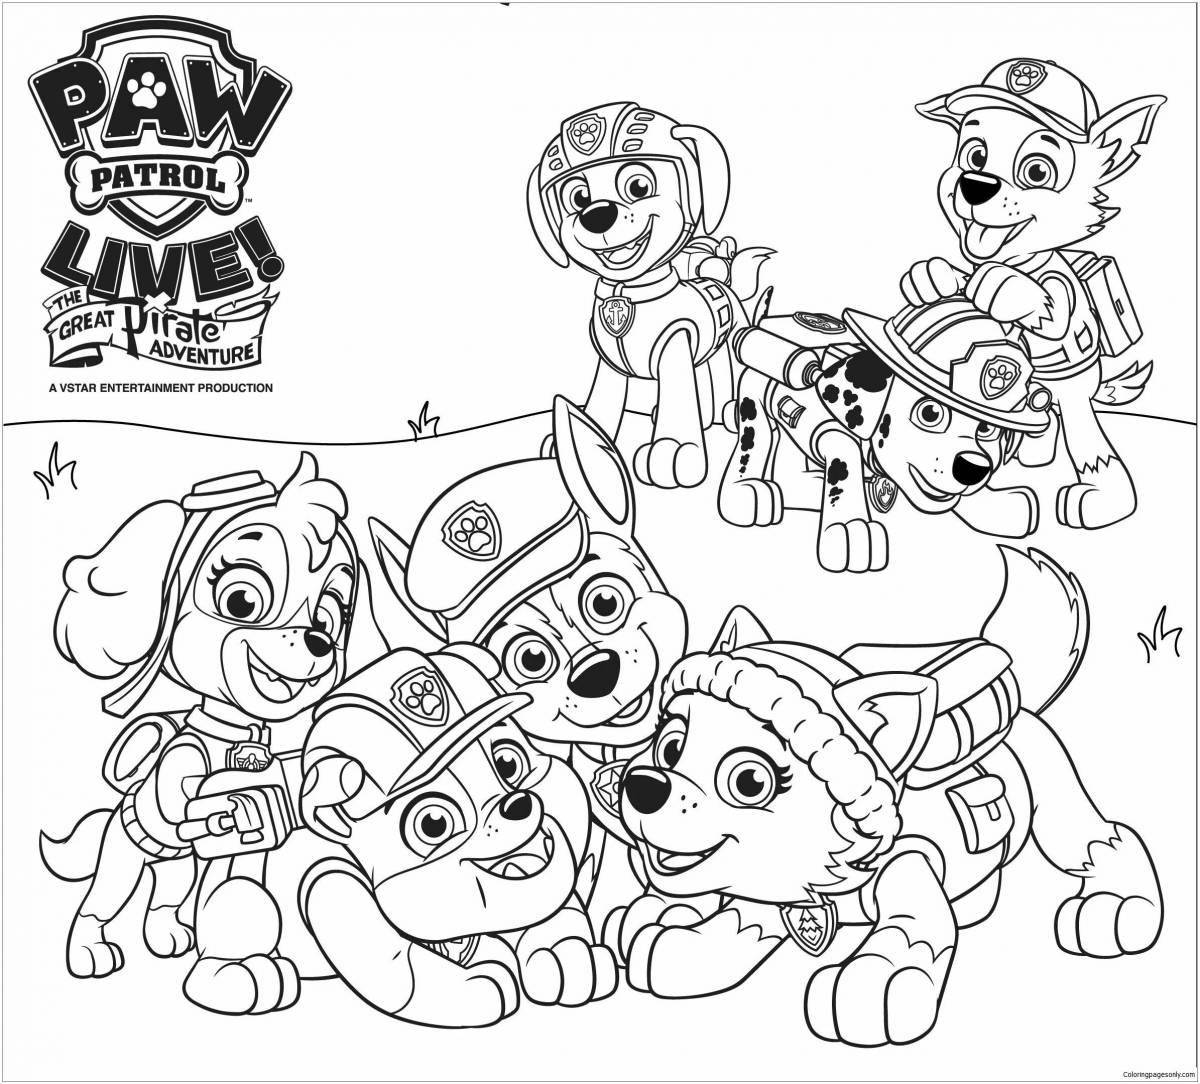 Inspirational Paw Patrol coloring book all heroes